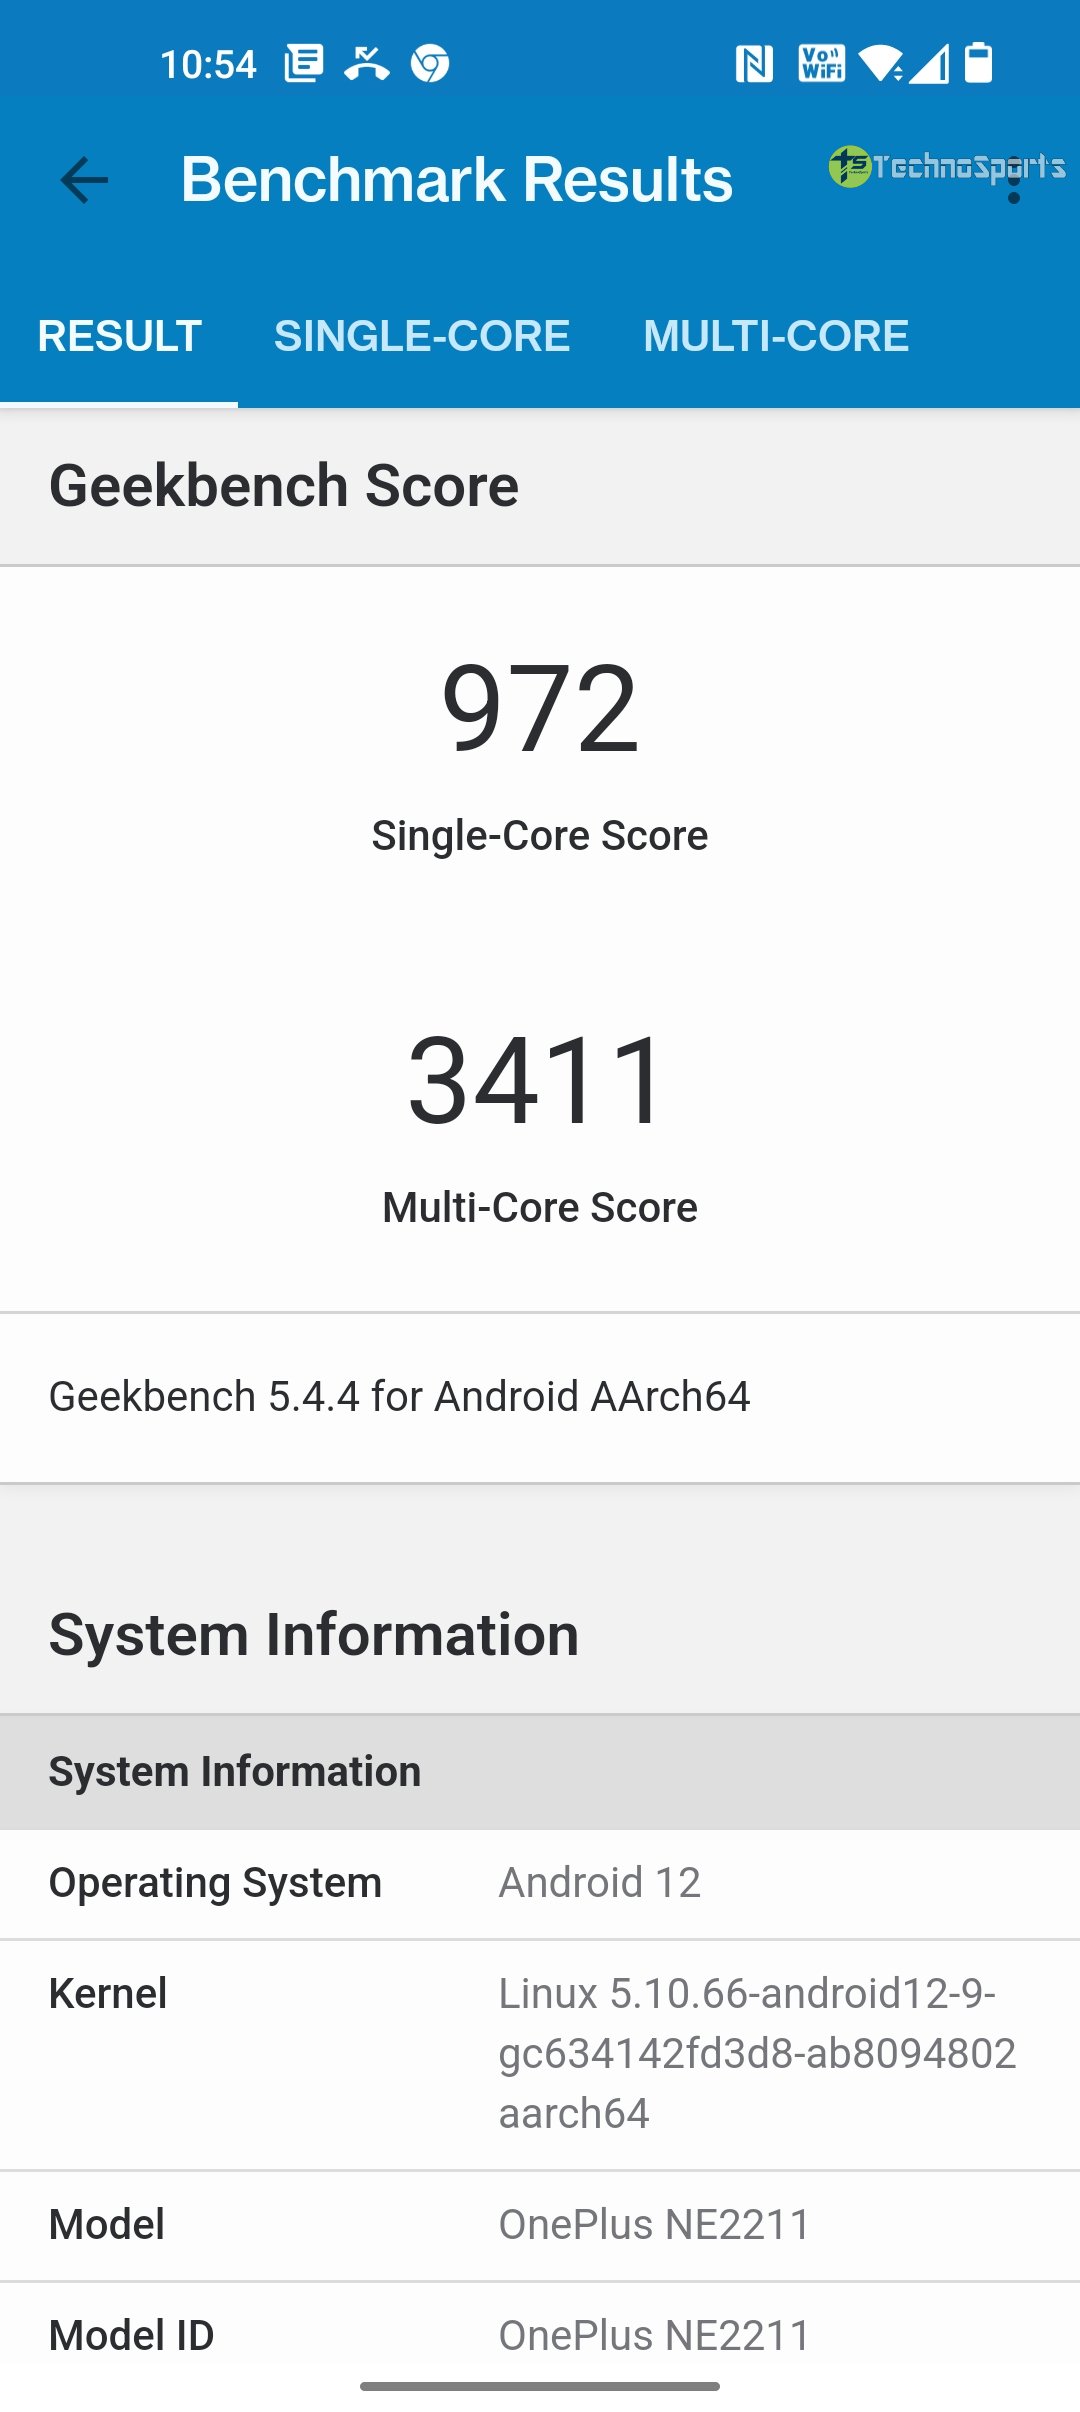 The Snapdragon 8 Gen 1 in the OnePlus 10 Pro do throttles but not as much as others